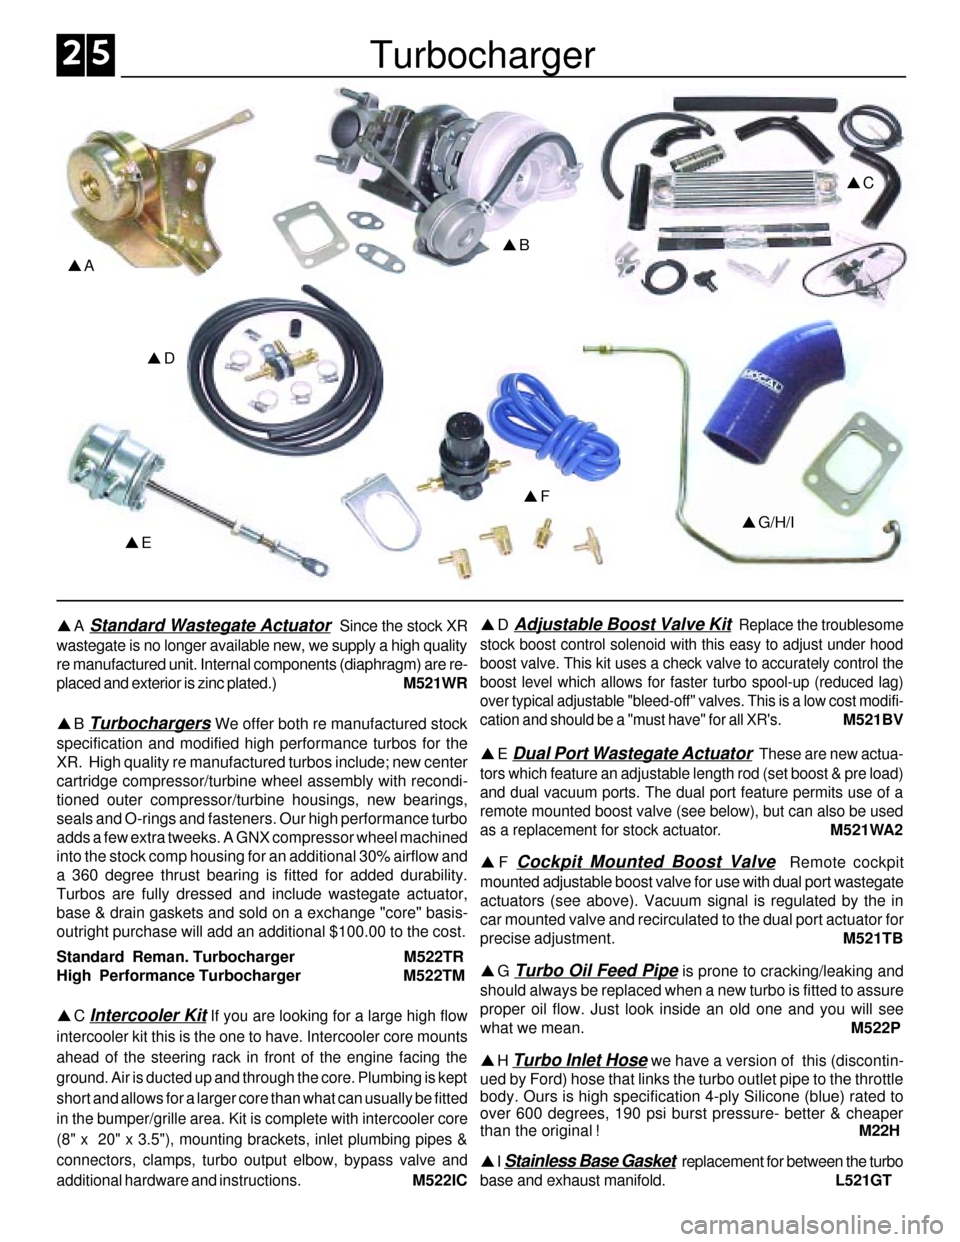 FORD SIERRA 1991 2.G XR4 Workshop Manual Turbocharger
pC
pG/H/I
pF
pD
pA
pB
pE
pA Standard Wastegate Actuator  Since the stock XR
wastegate is no longer available new, we supply a high quality
re manufactured unit. Internal components (diaph